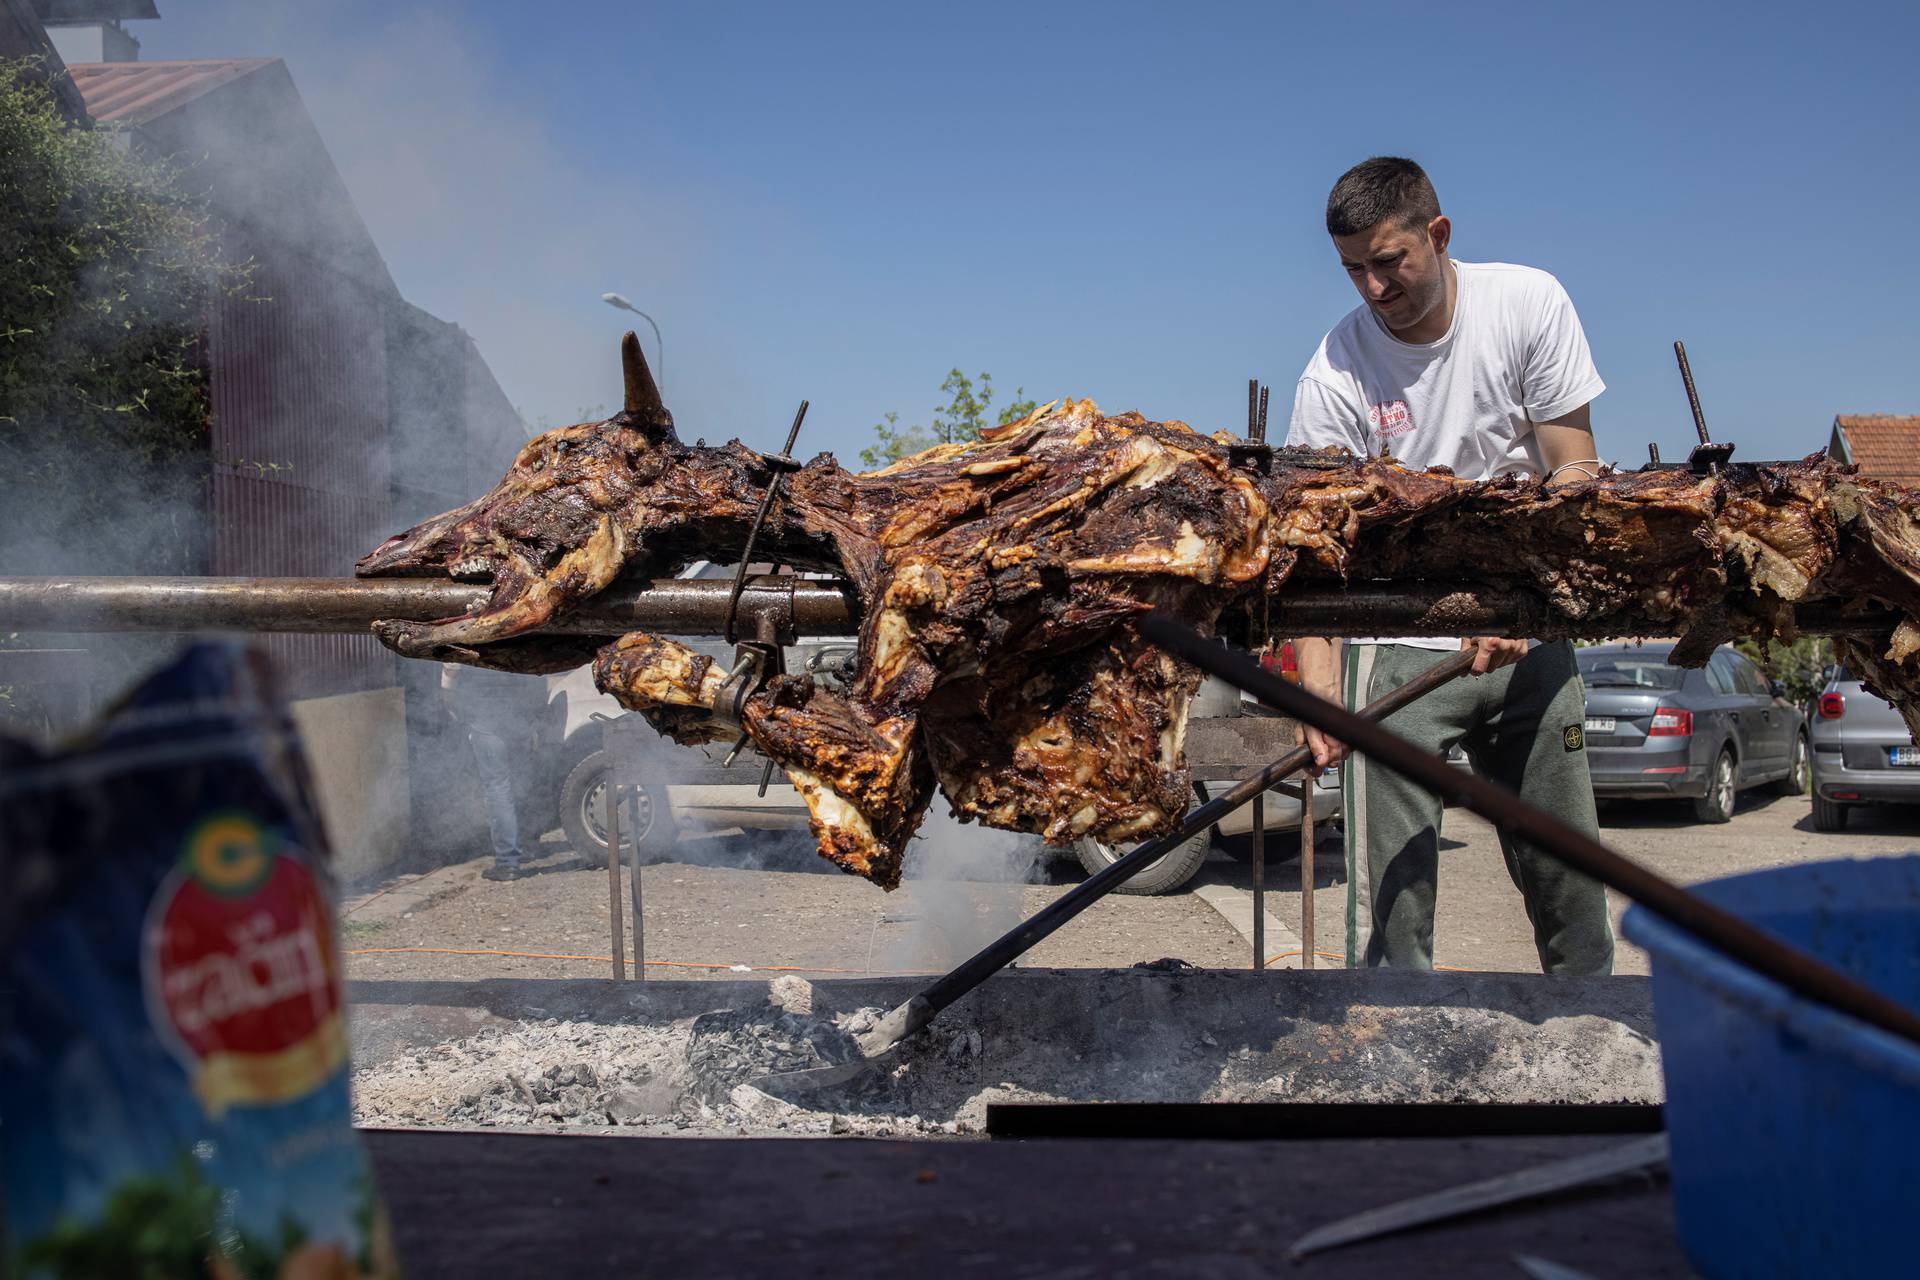 Serbian restaurant offers roasted ox to promote COVID-19 vaccination